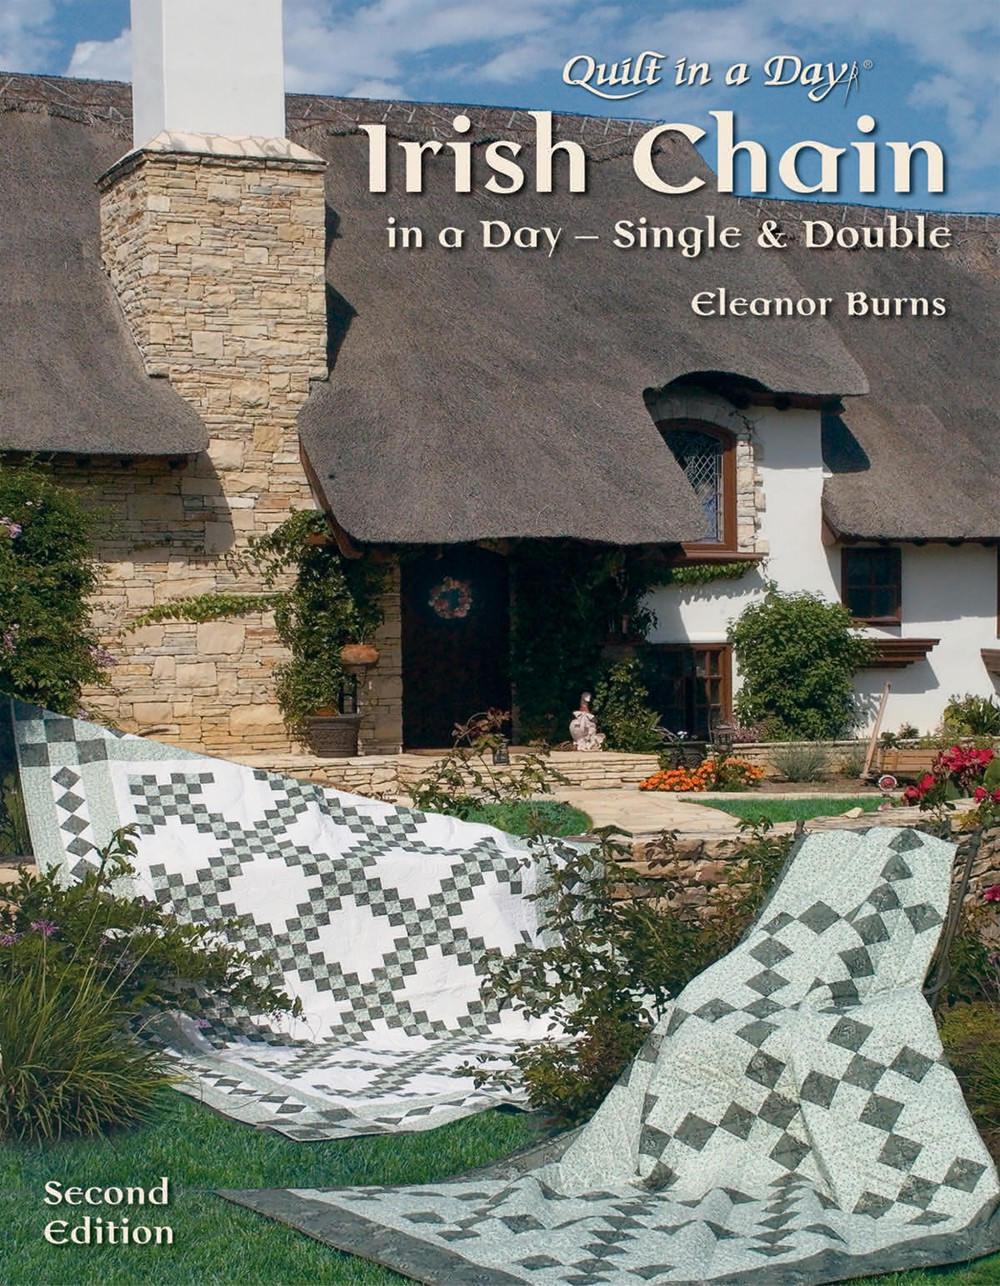 Irish Chain In A Day Quilt Pattern Book by Eleanor Burns for Quilt In A Day